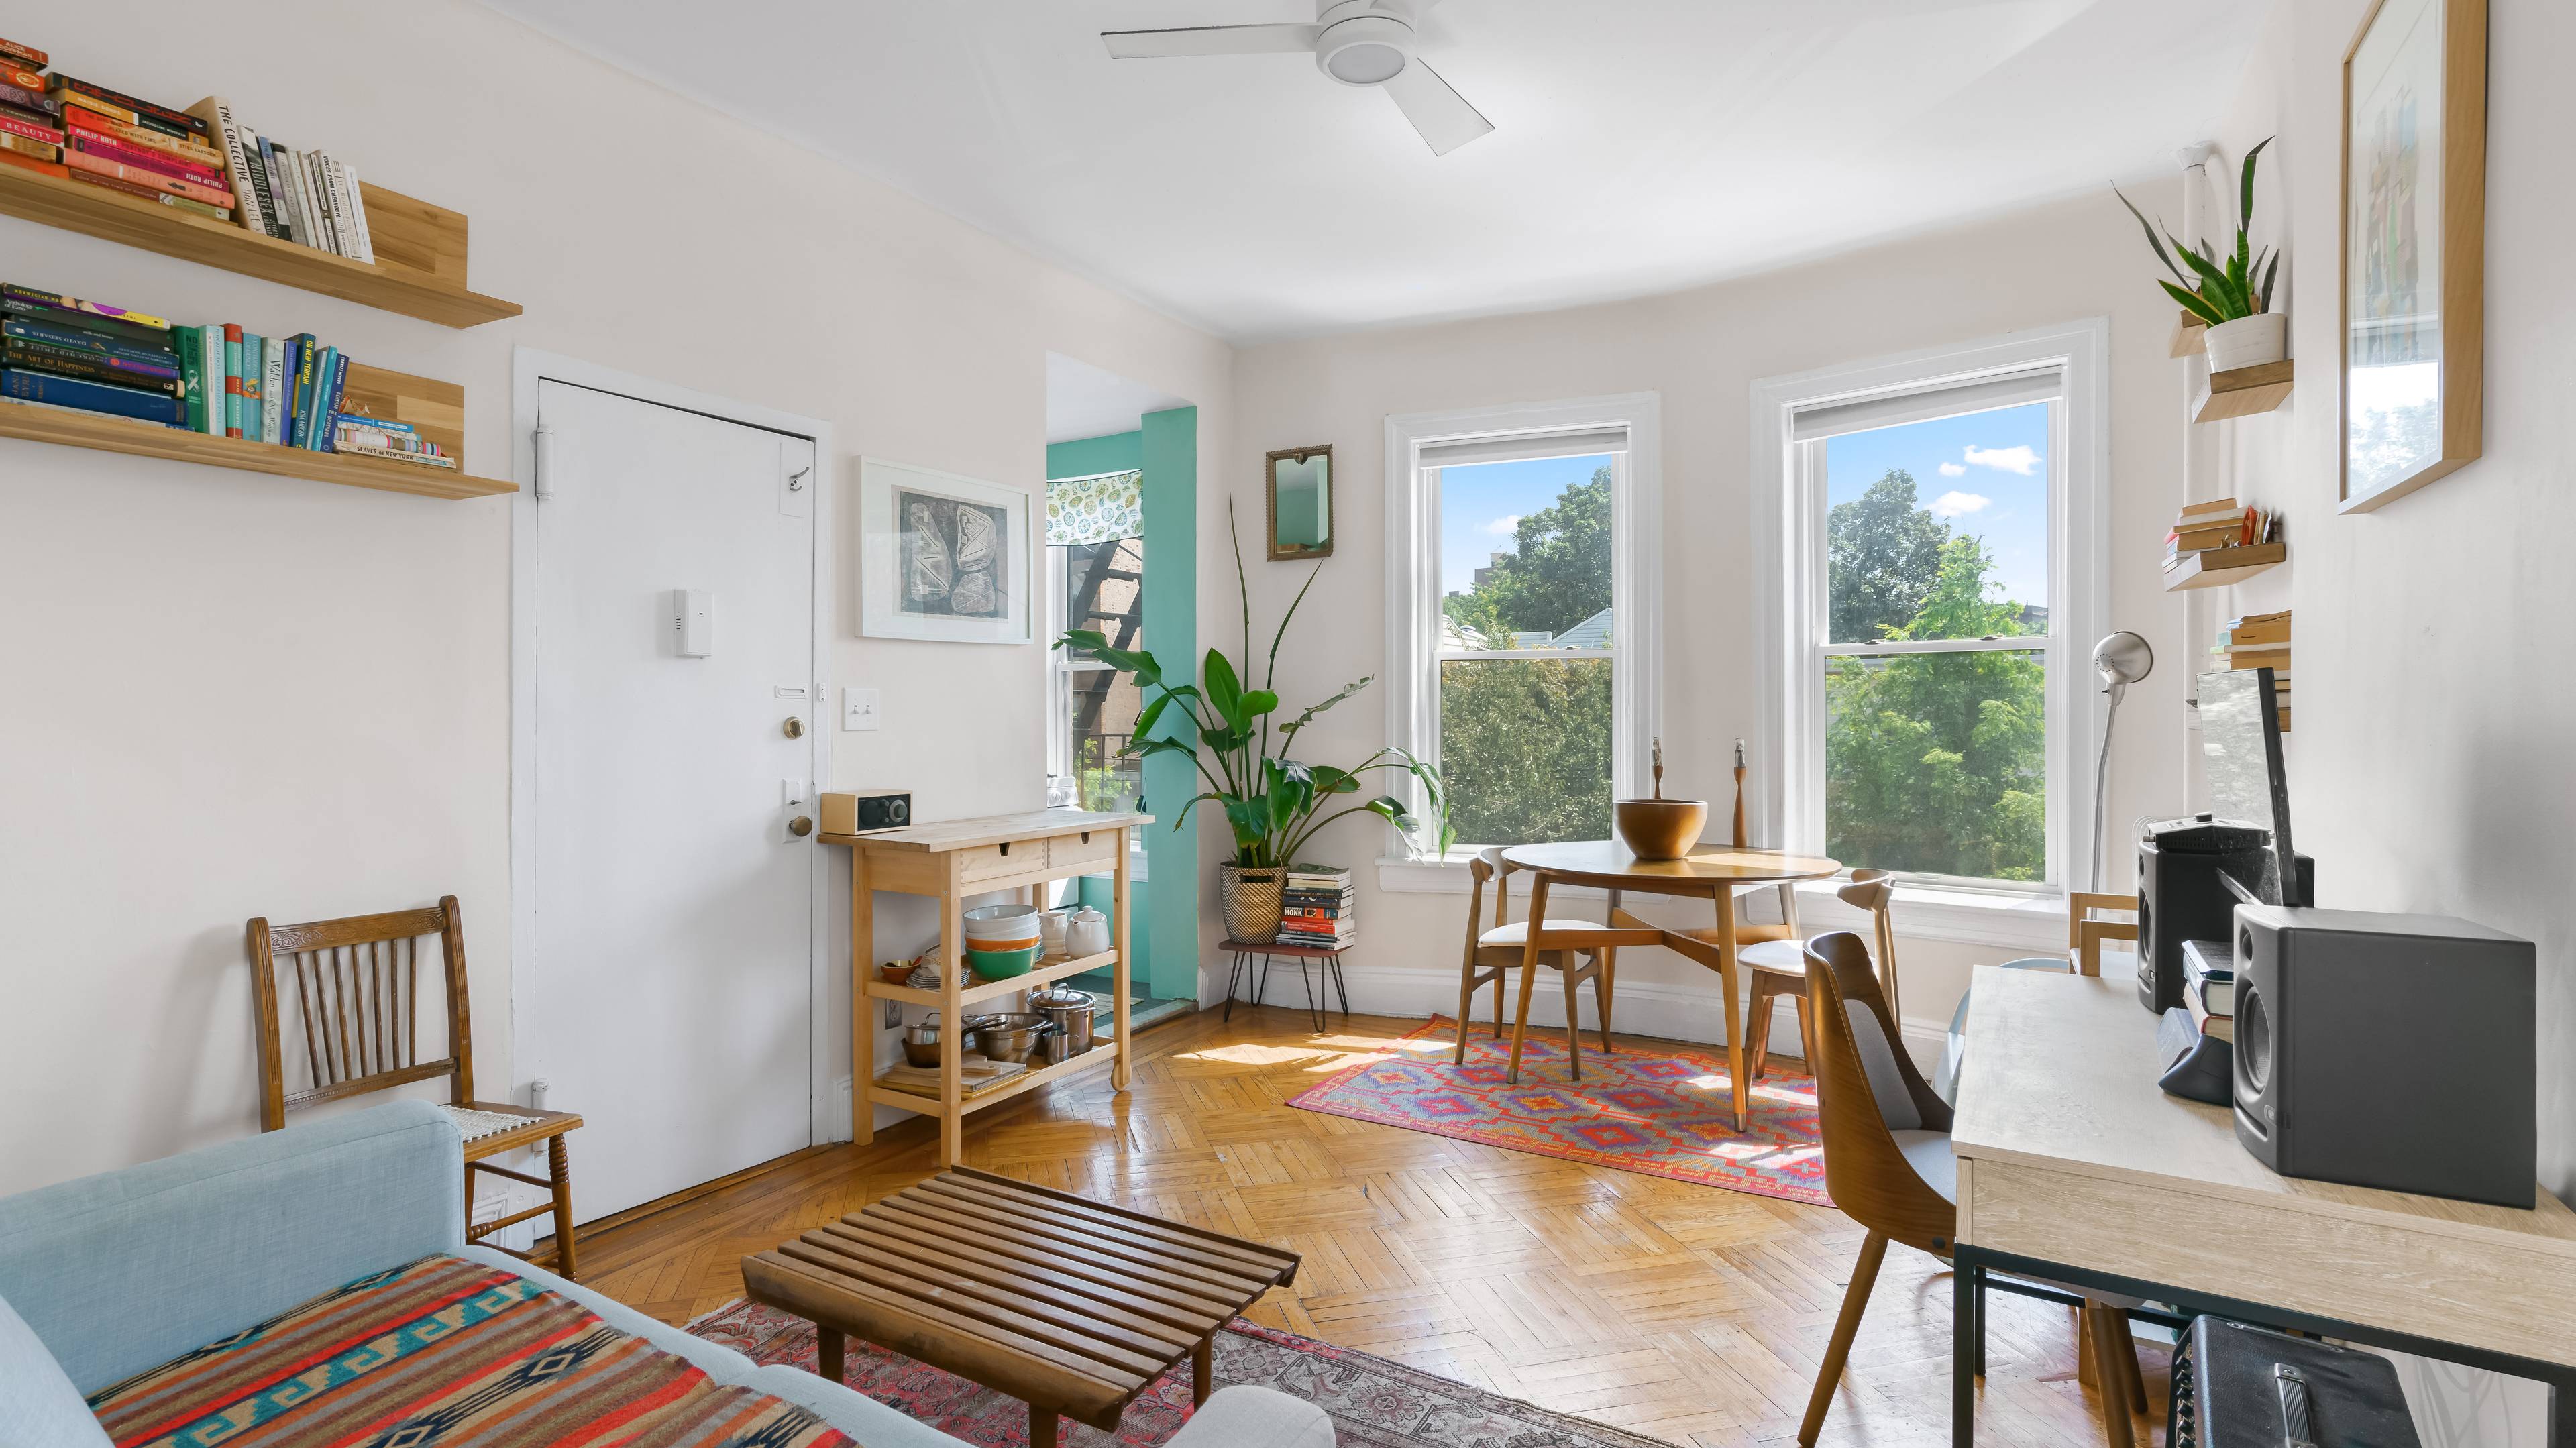 Prime Location in Windsor Terrace Nestled on a quiet tree lined block in Windsor Terrace, this charming one bedroom is a special find.